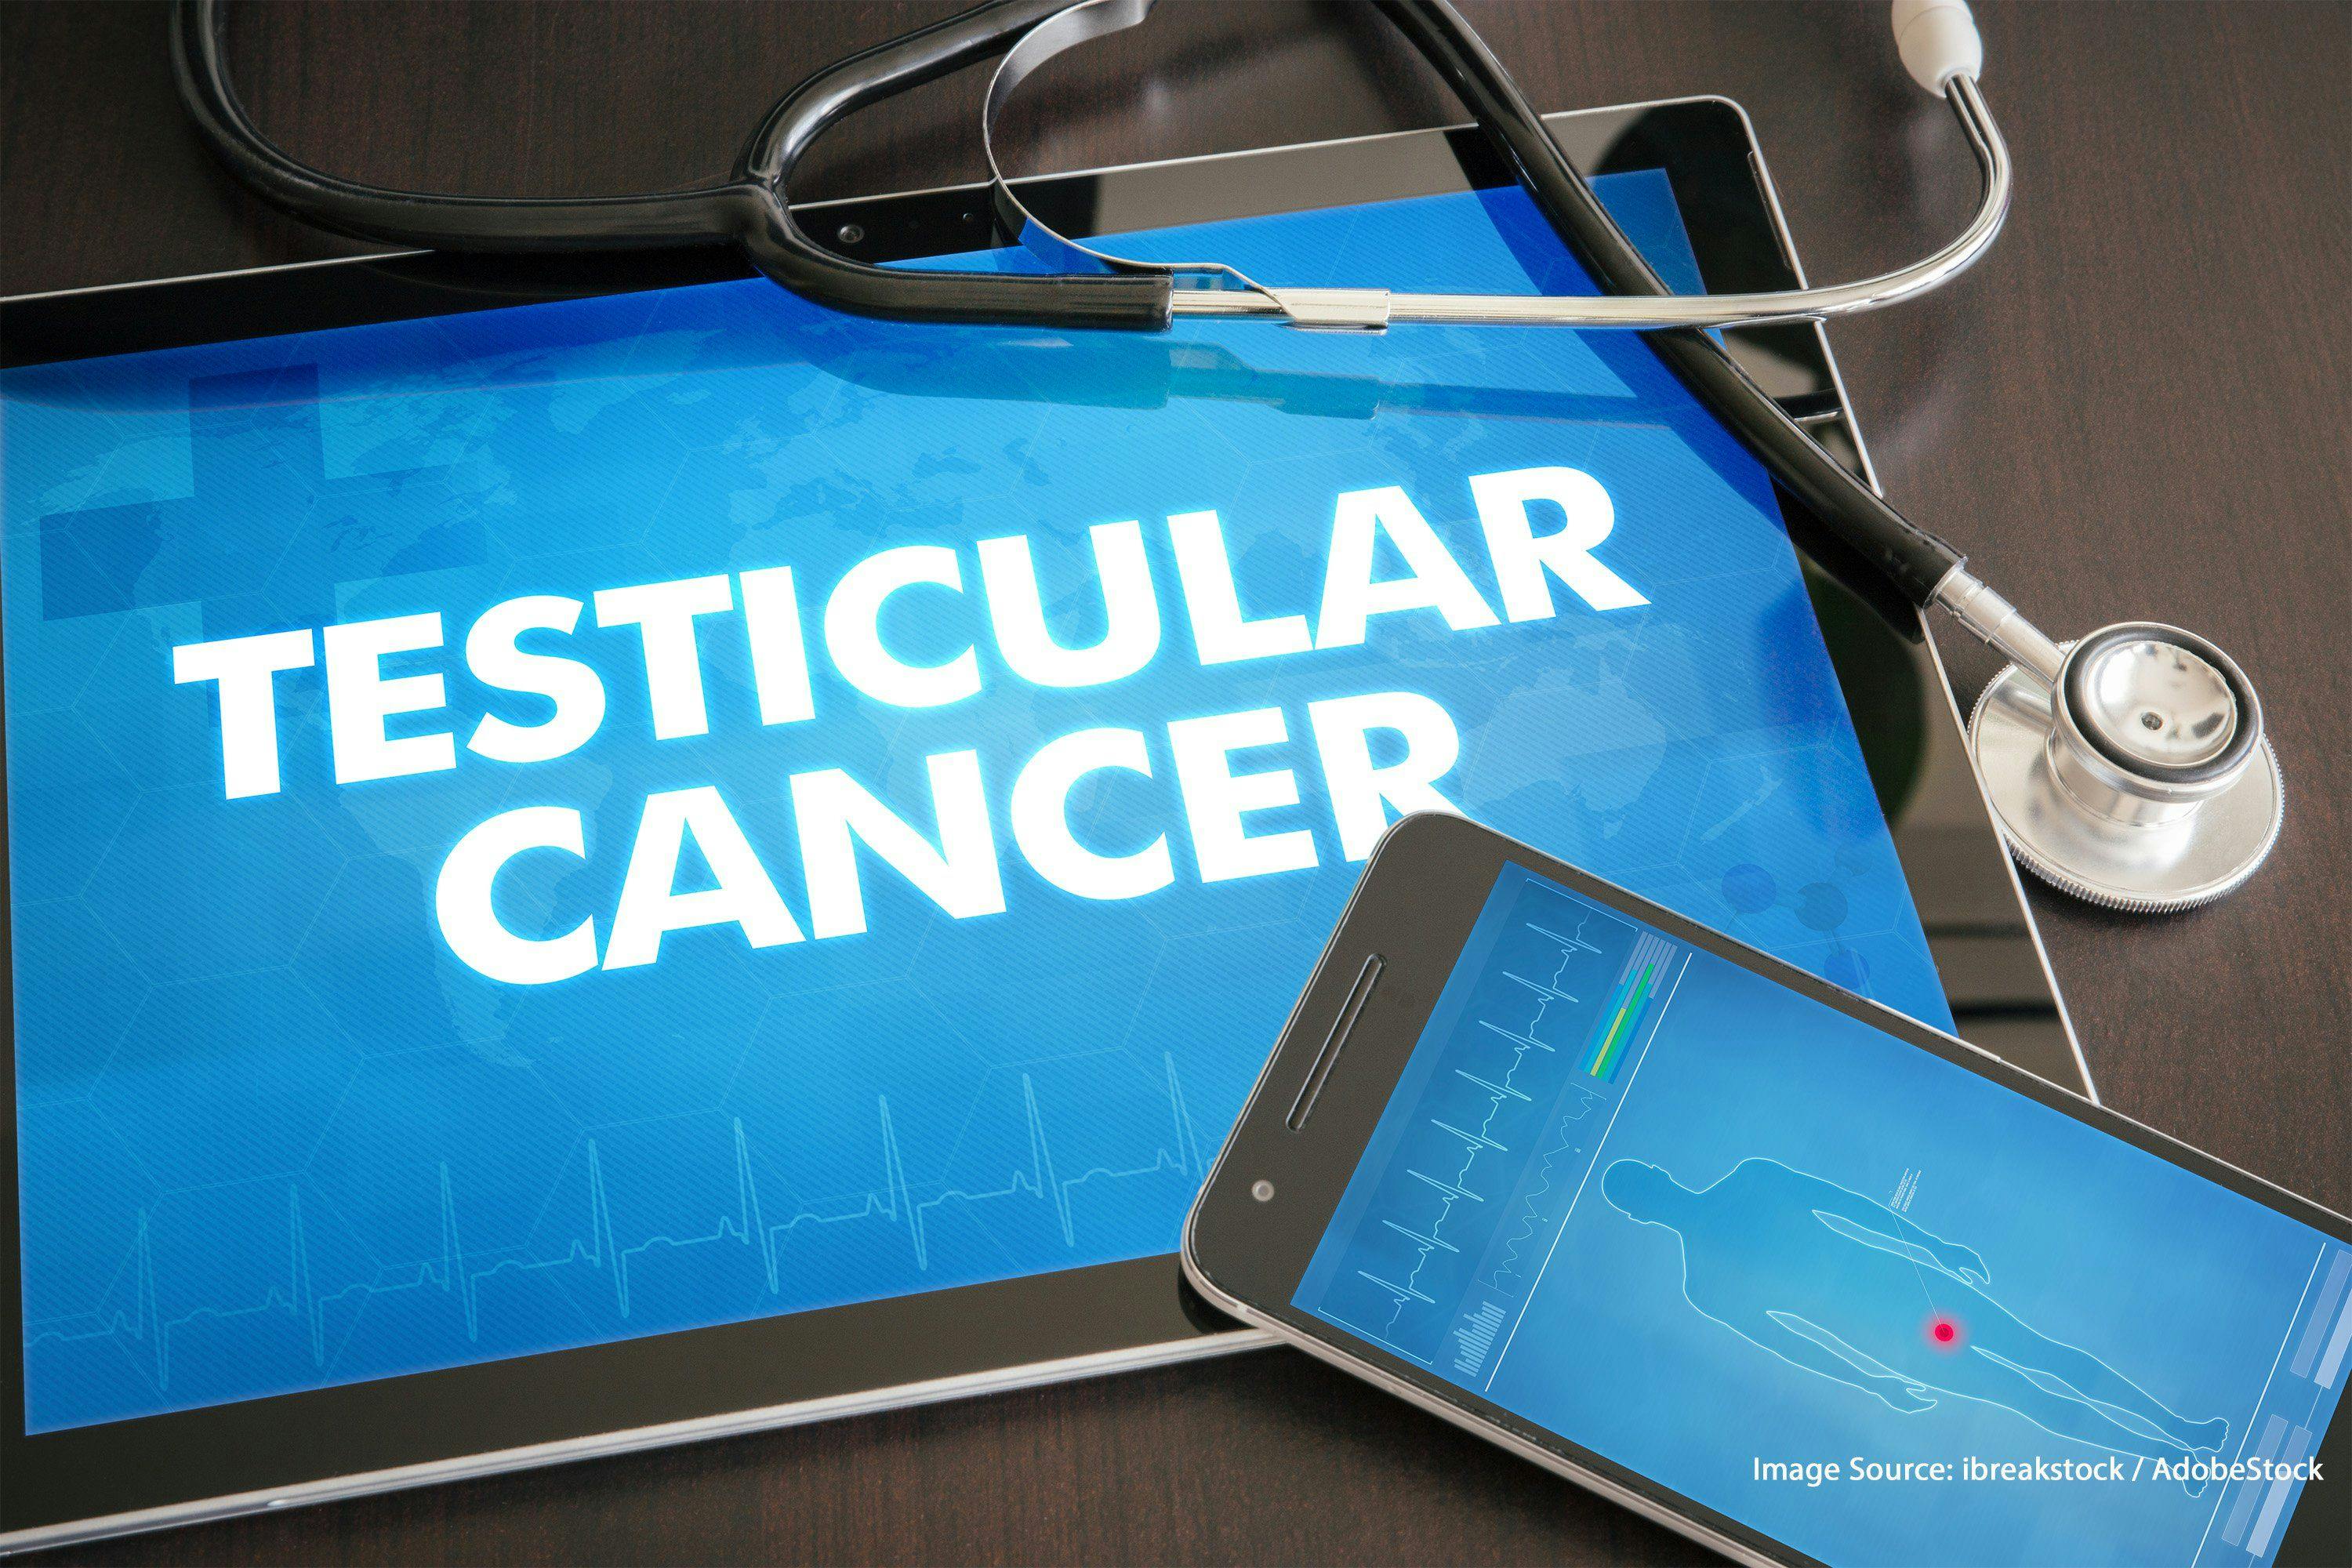 Variant Identified for Testicular Cancer Signals Heightened Risk for Later Cancers